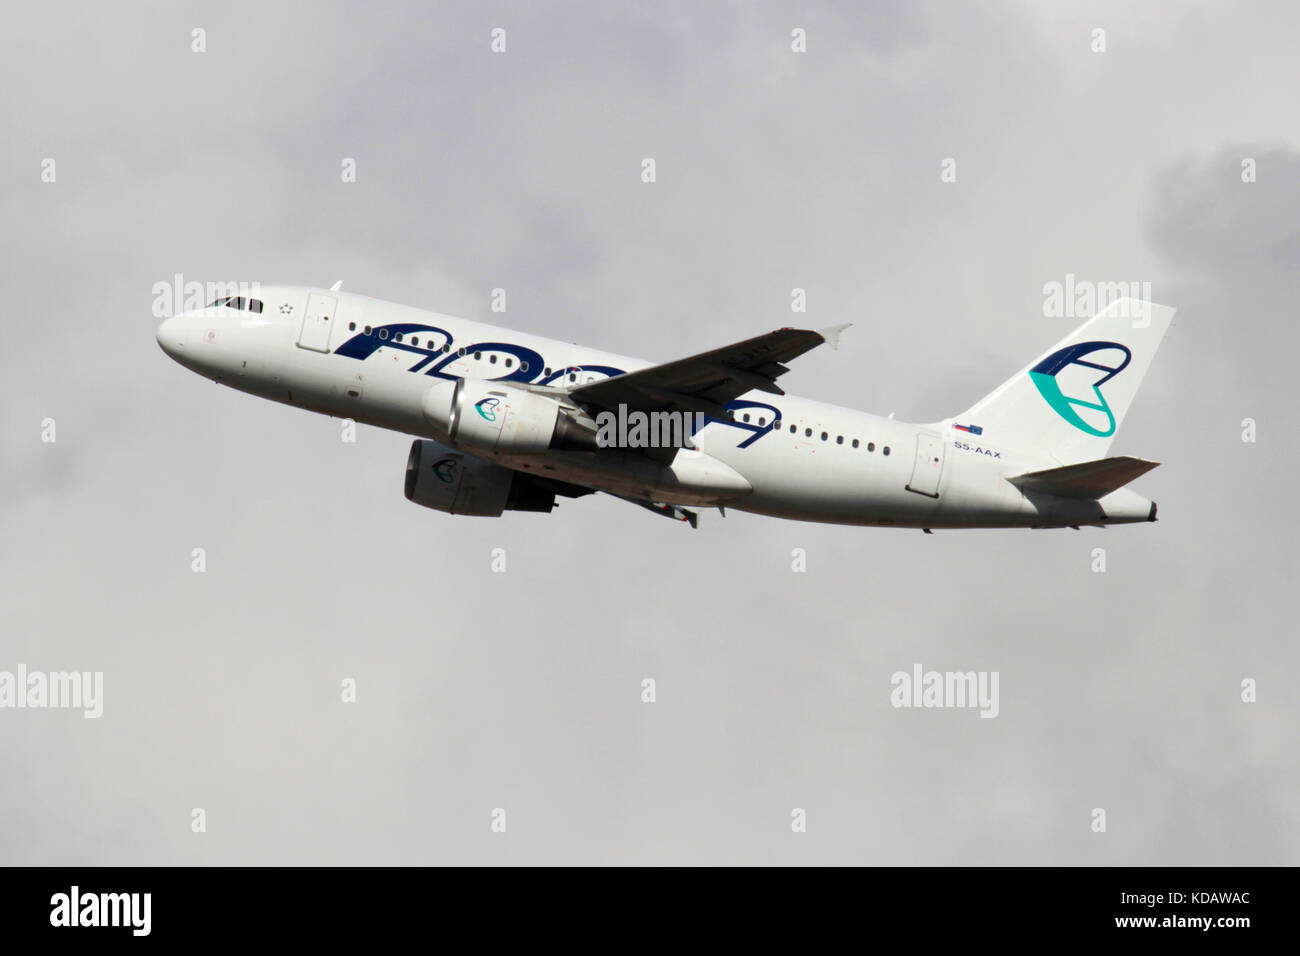 Adria Airways Airbus A319 in flight against a cloudy sky Stock Photo